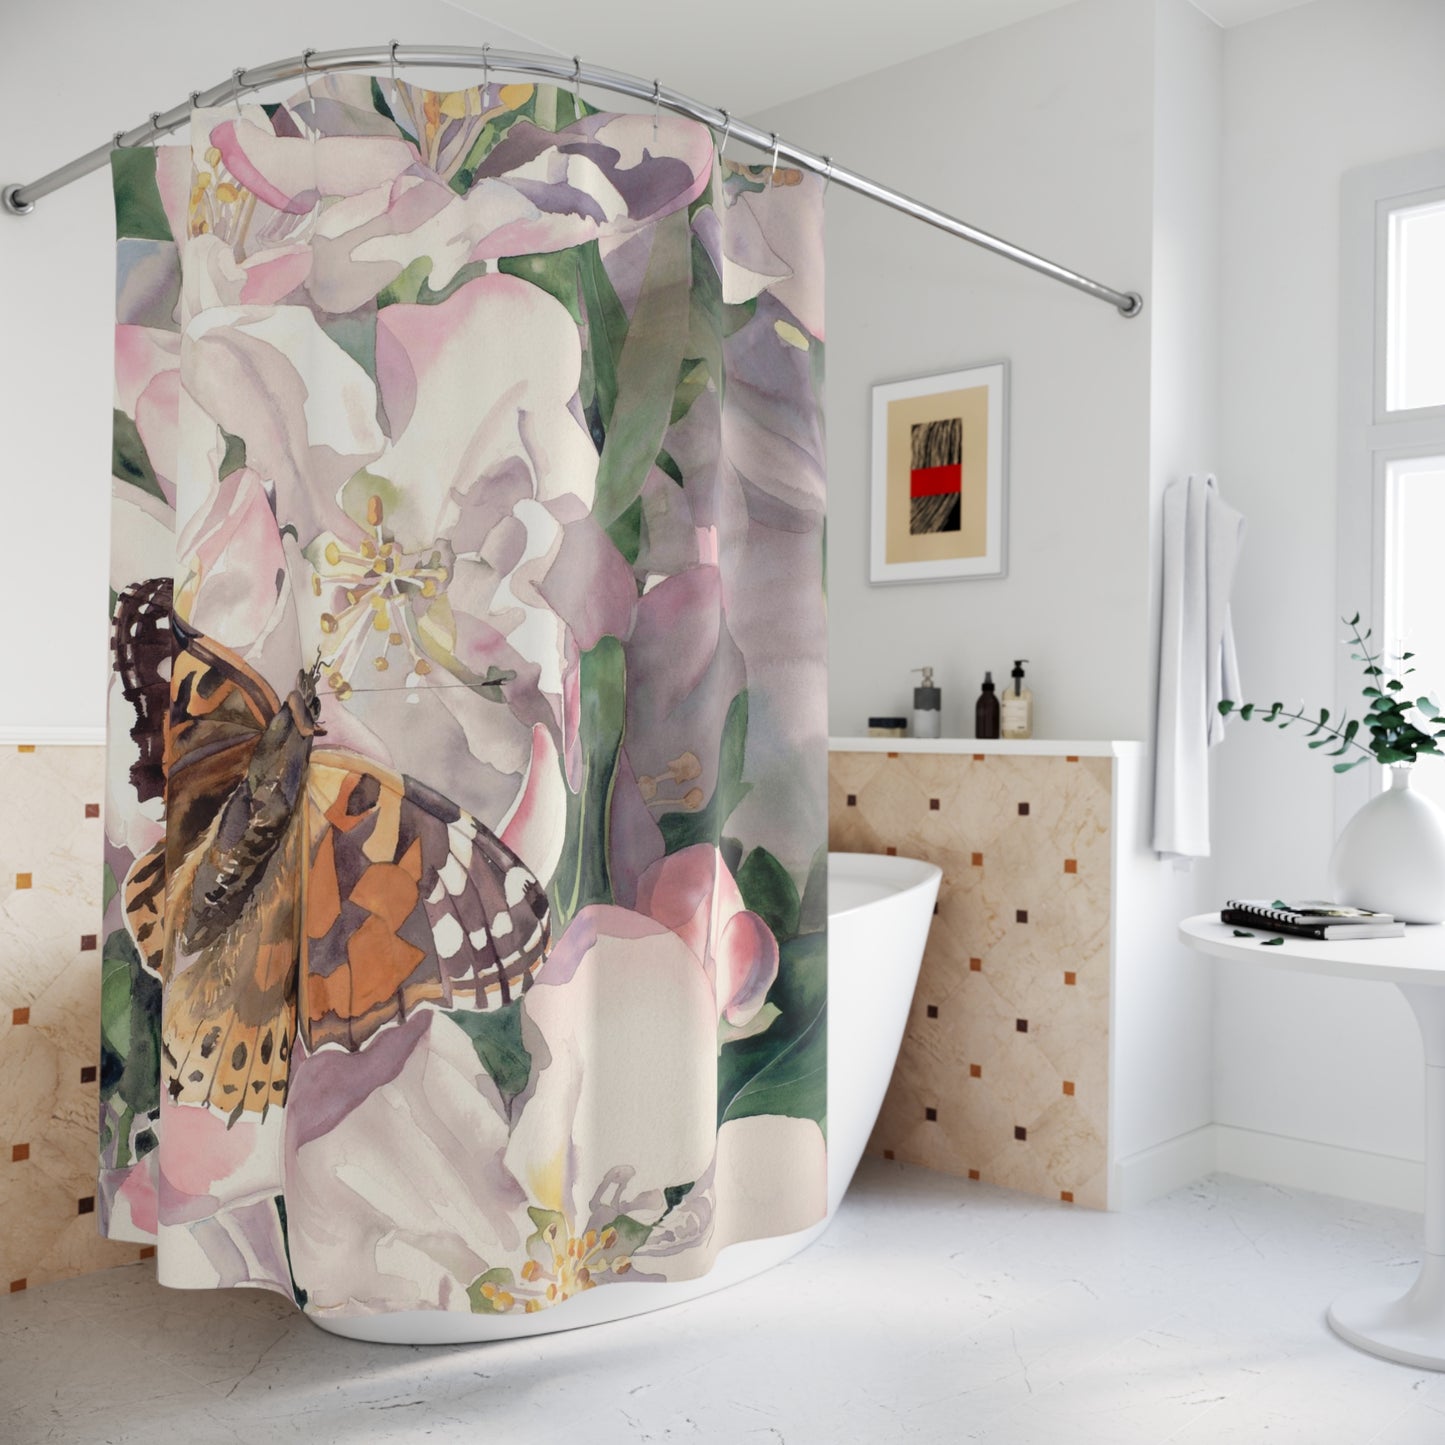 Copy of "Spring Traveler" Polyester Shower Curtain